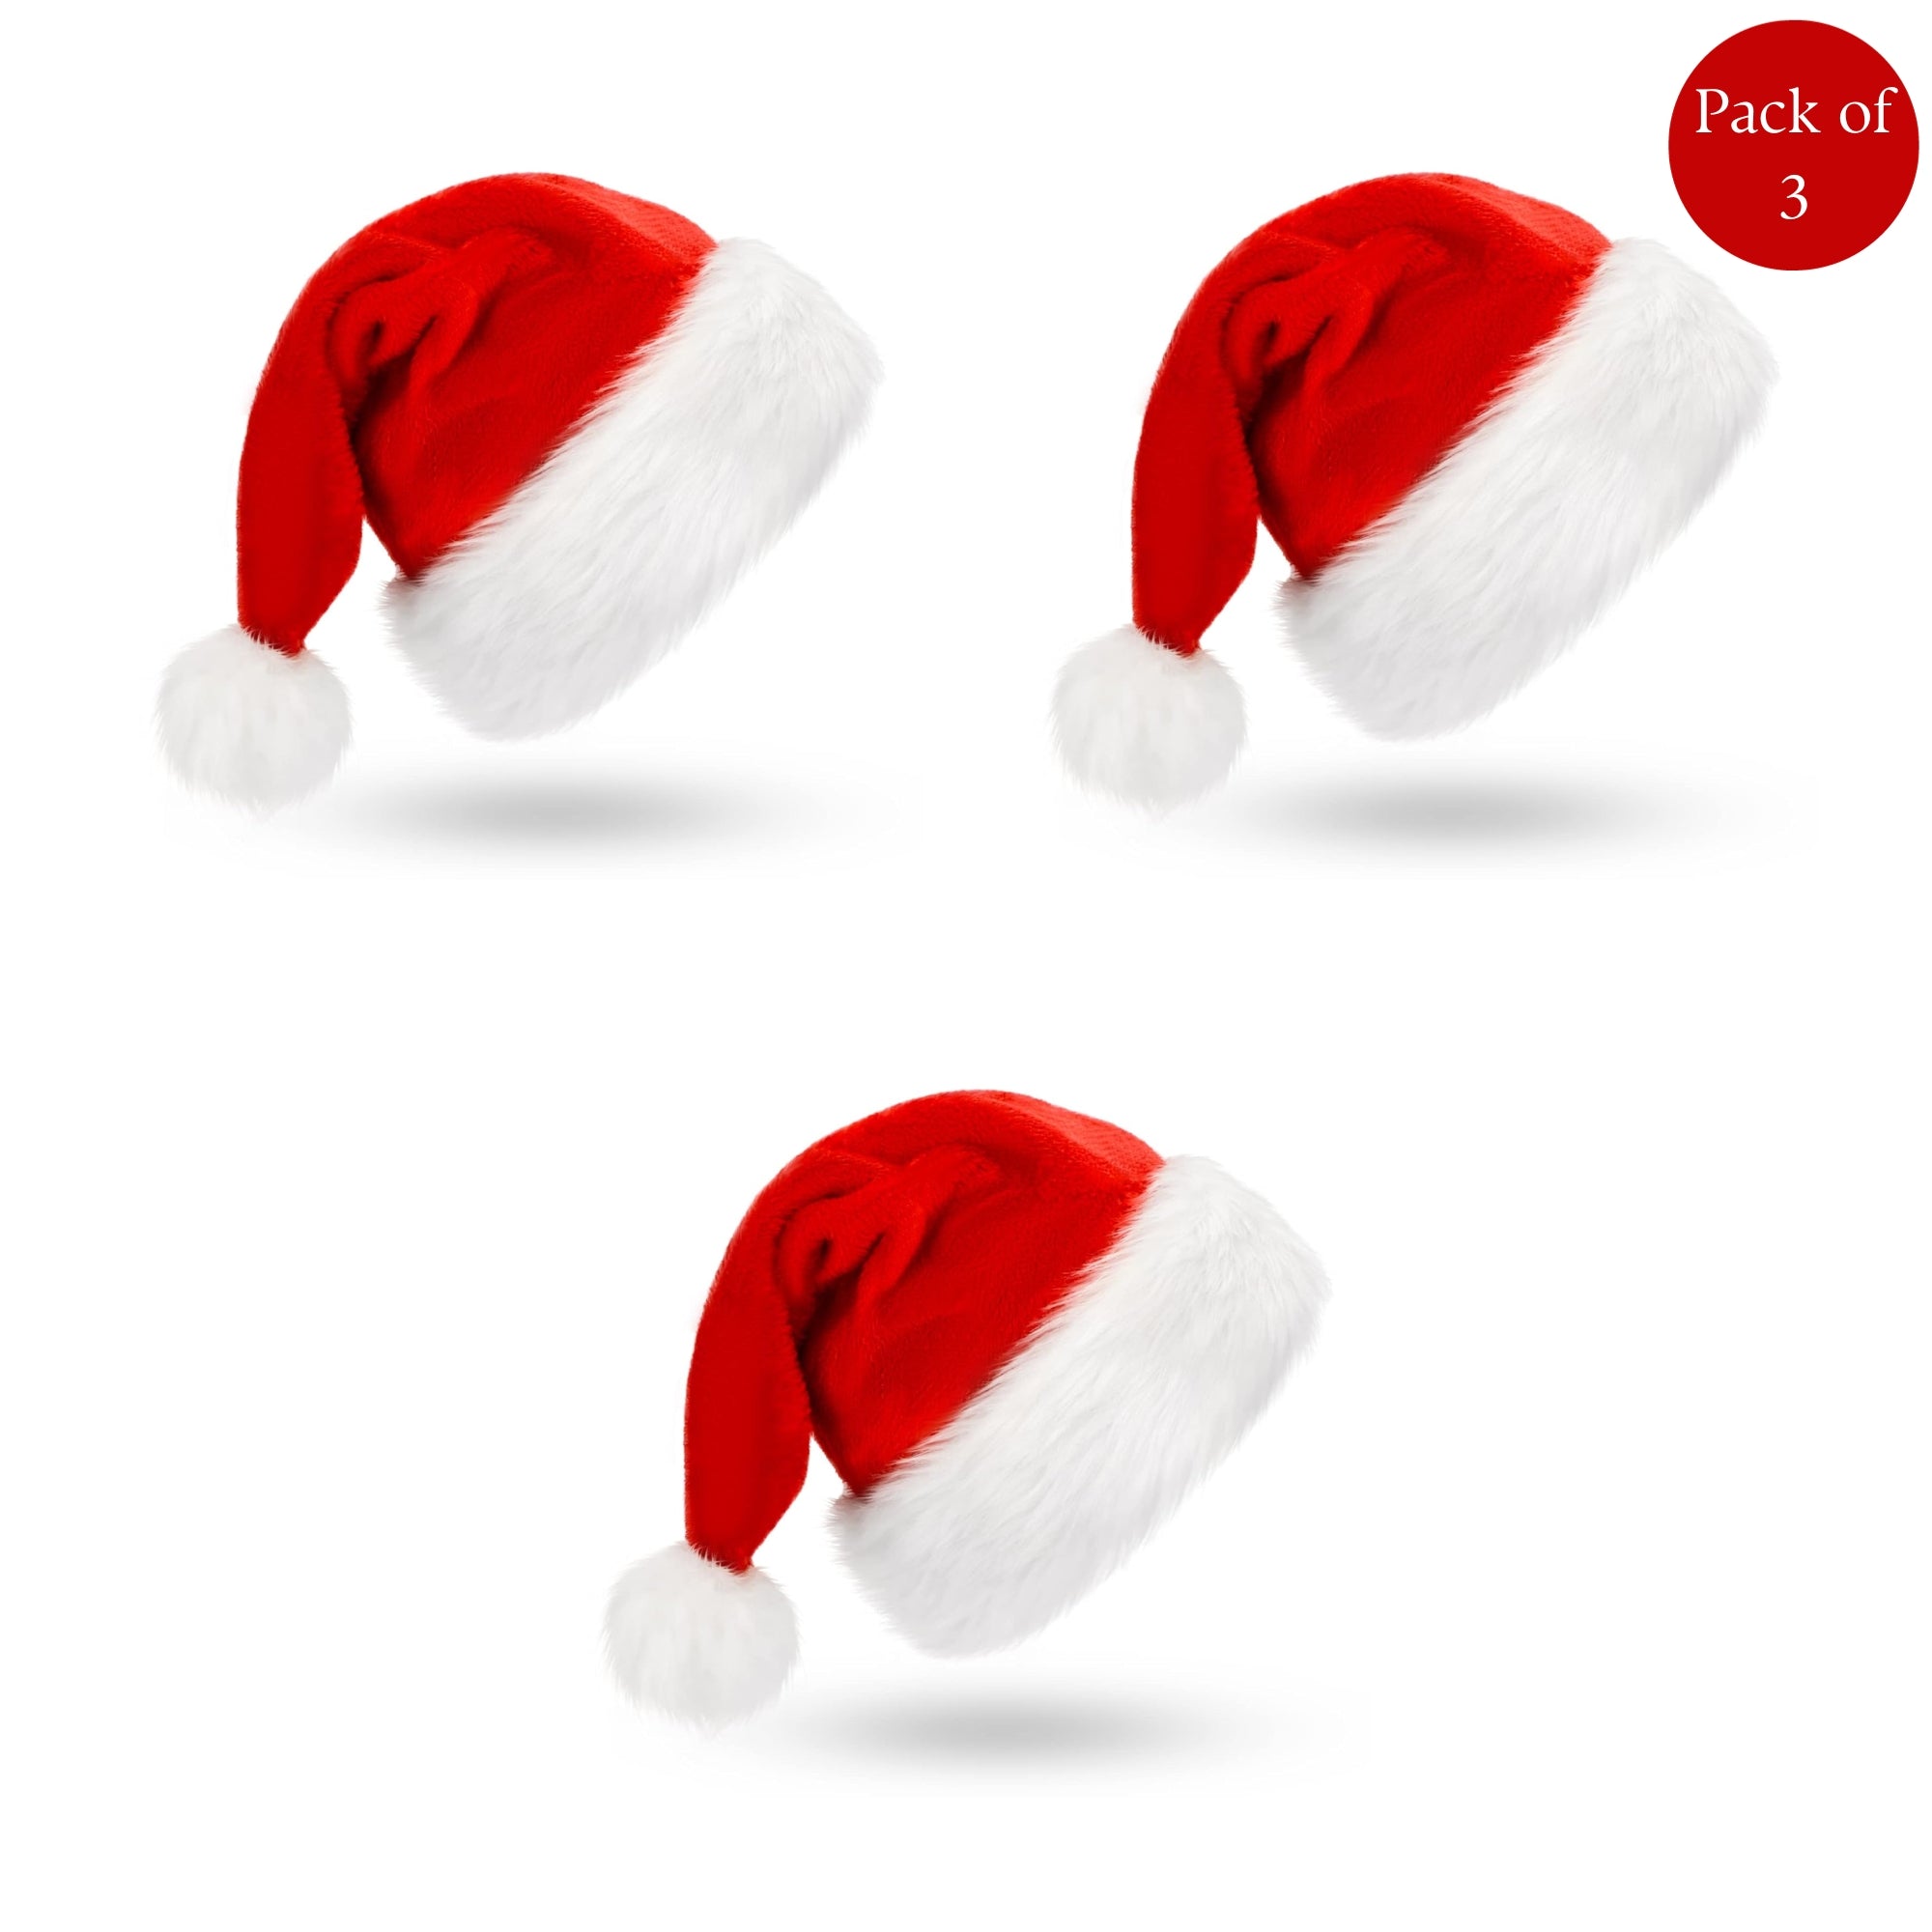 eCraftIndia Red and White Velvet Classic Fur Merry Christmas Hats, Santa Claus Caps for kids and Adults - XMAS Caps, Santa Hats for Christmas, New Year, Festive Holiday Party Celebration (Set of 3) 1